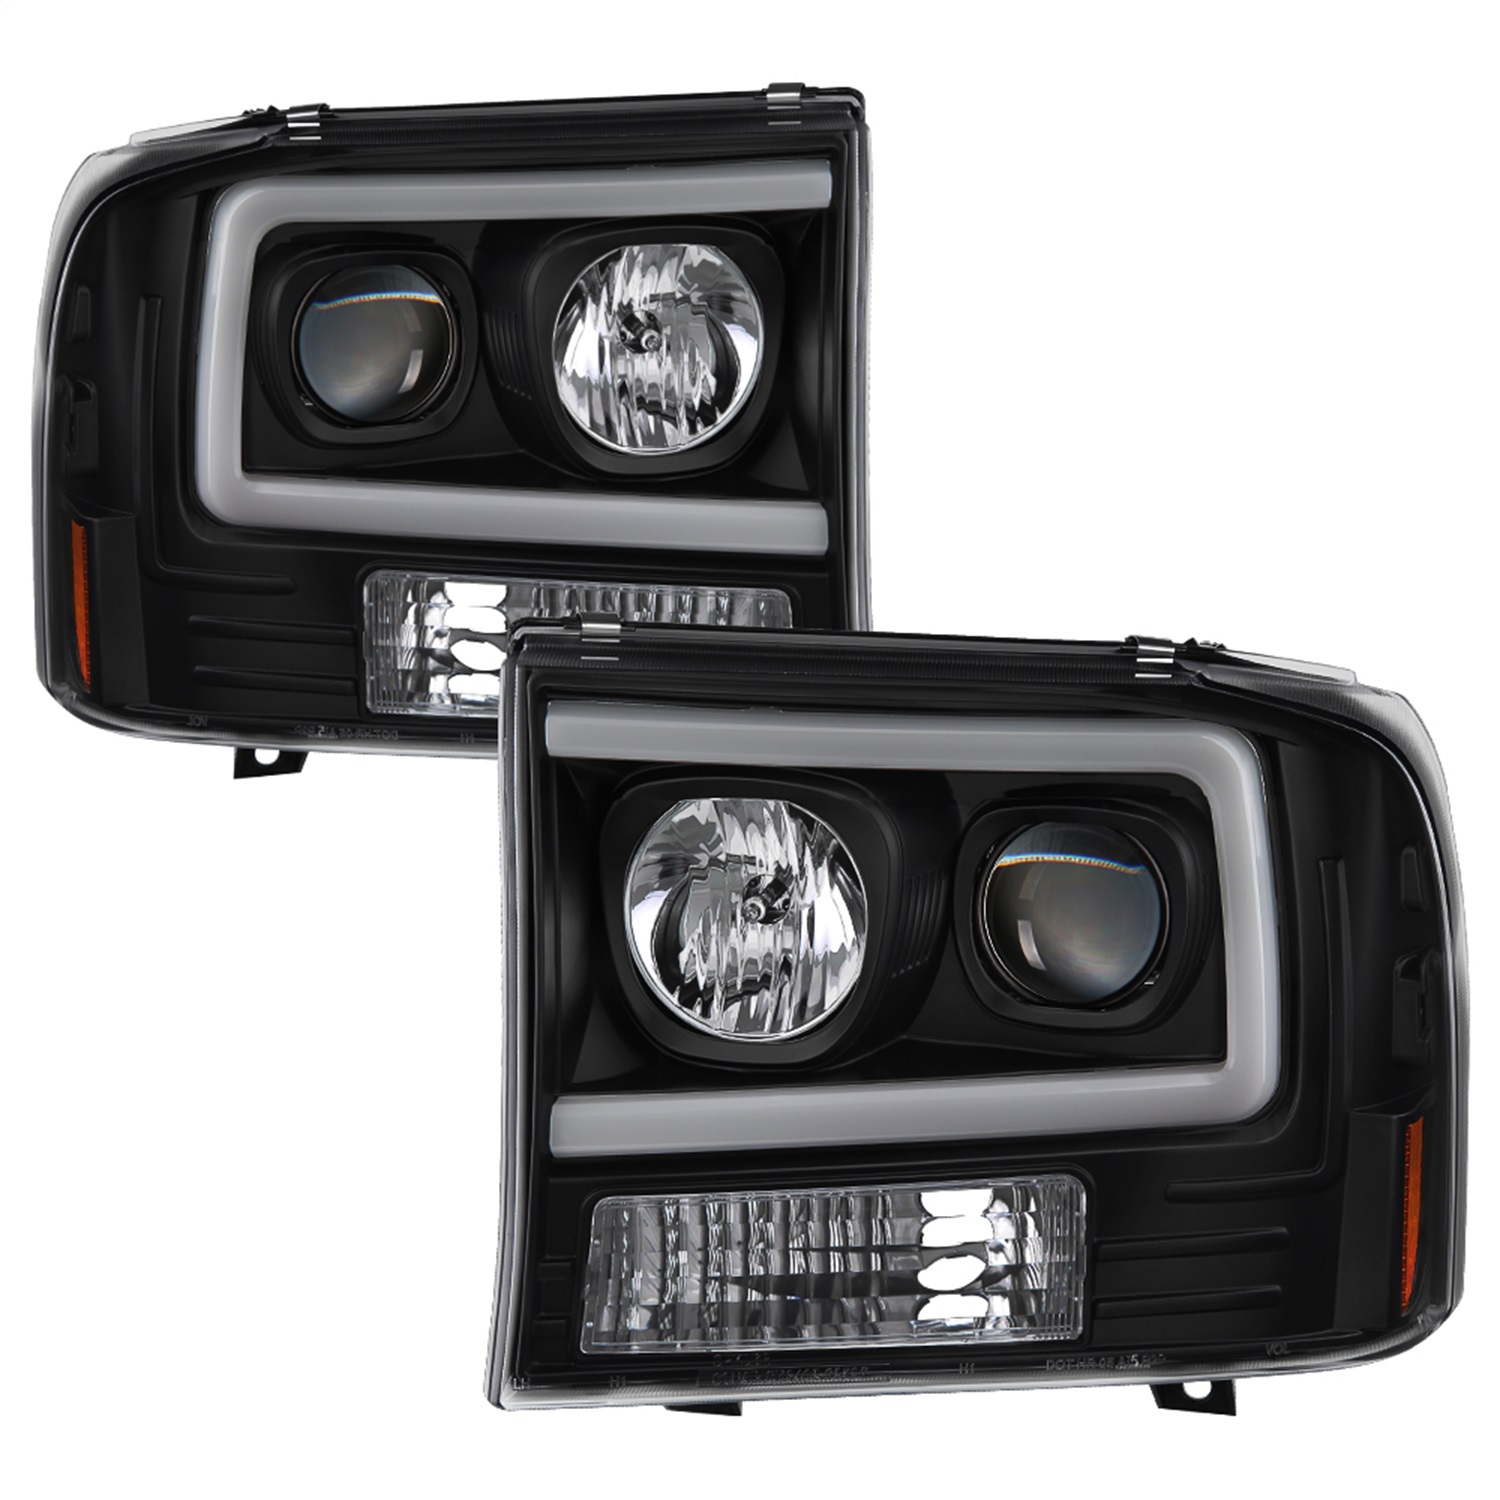 Spyder Auto 5084491 Projector Headlights Fits 99-04 Excursion F-250 Super Duty